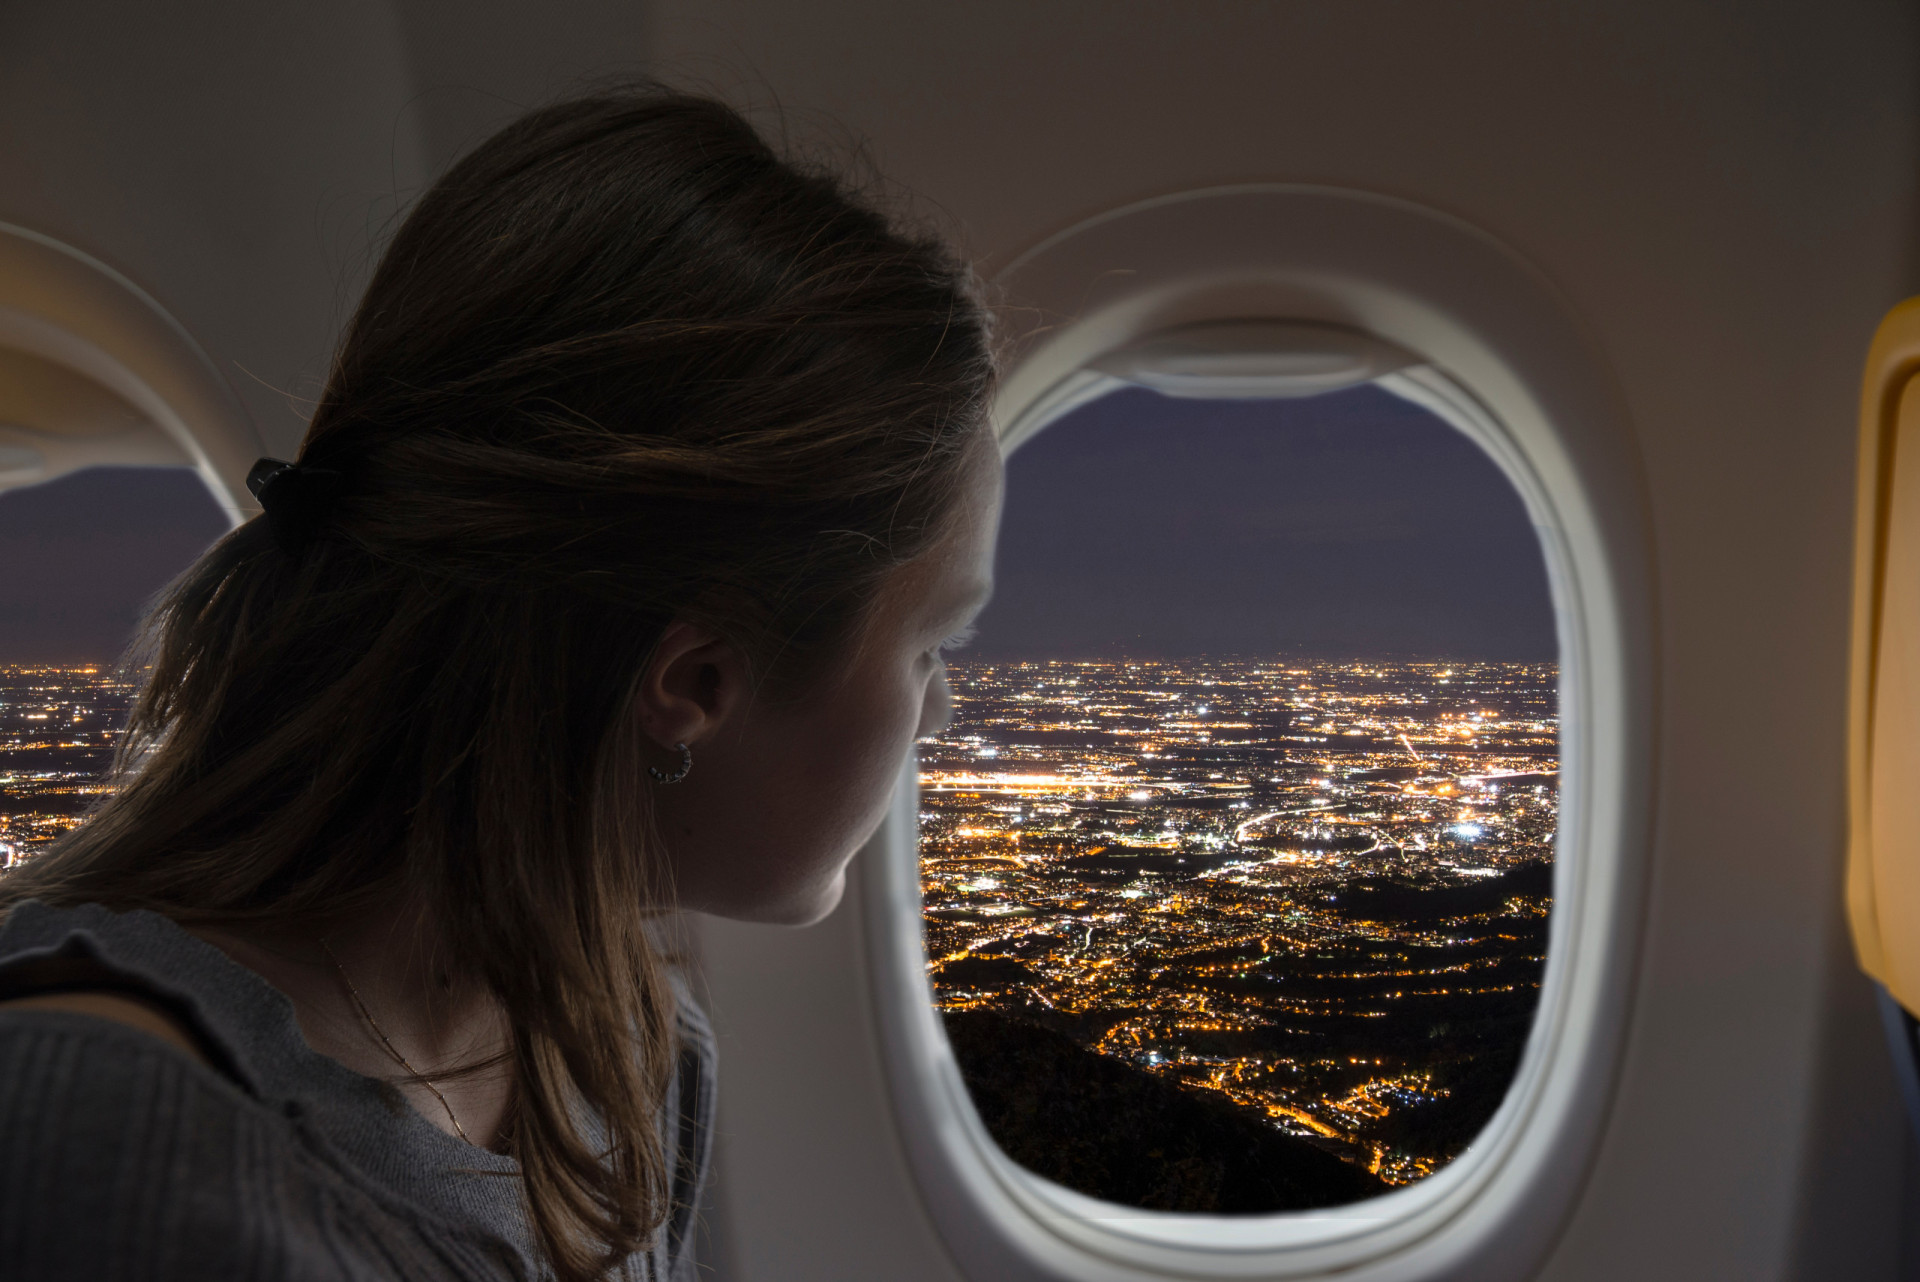 <p>Nothing about conjunctivitis here! A pink-eye flight takes off earlier than a red-eye, but the difference is that it's not an overnight flight.</p><p><a href="https://www.msn.com/en-us/community/channel/vid-7xx8mnucu55yw63we9va2gwr7uihbxwc68fxqp25x6tg4ftibpra?cvid=94631541bc0f4f89bfd59158d696ad7e">Follow us and access great exclusive content every day</a></p>